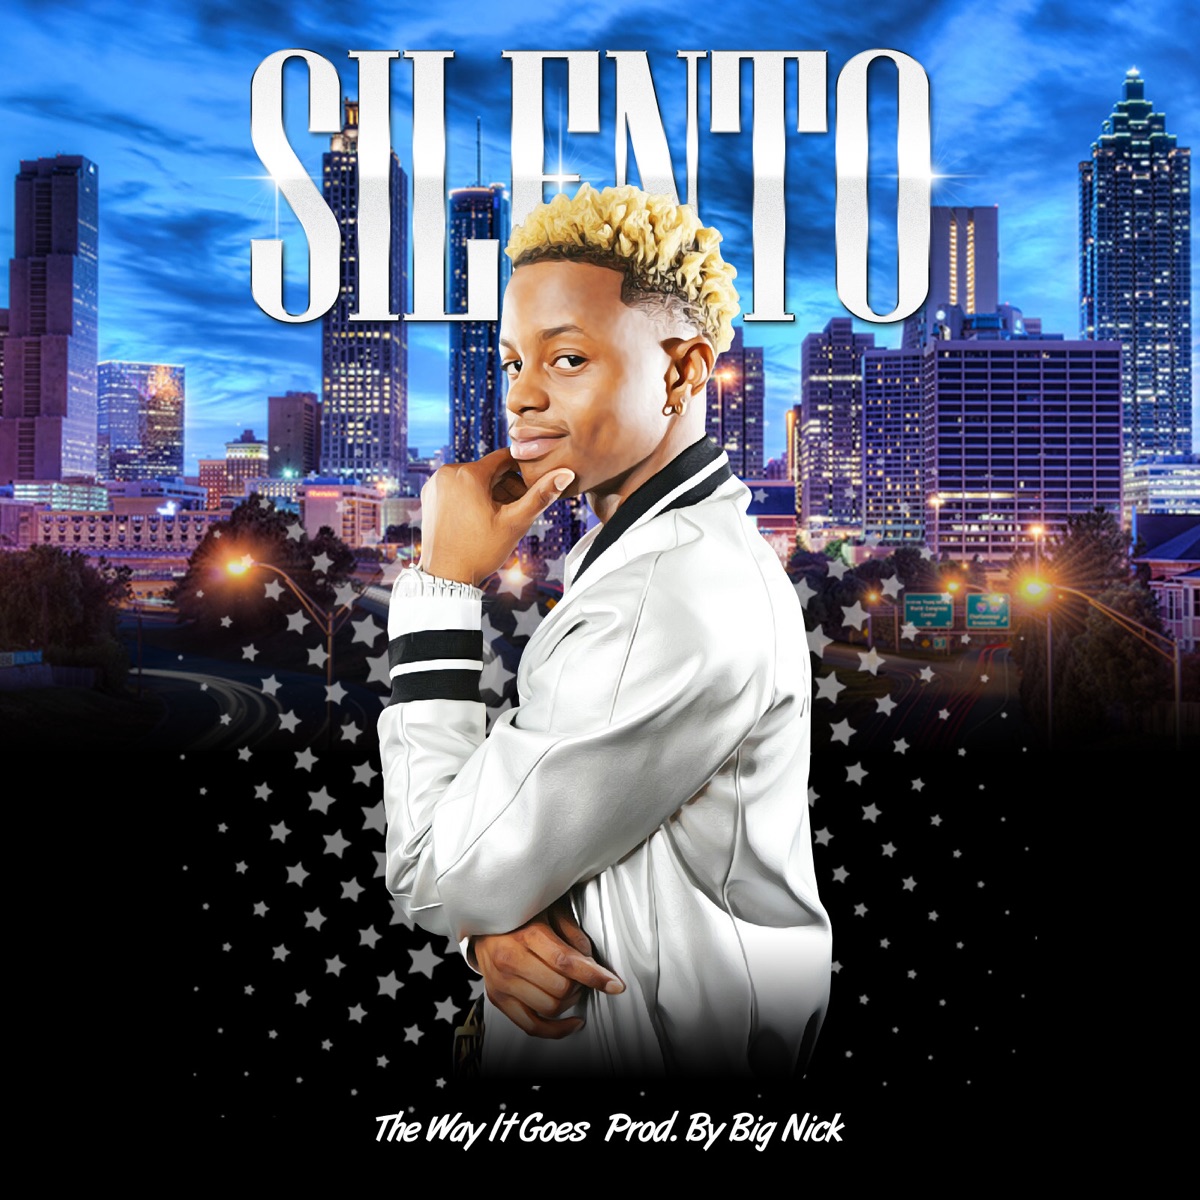 Watch Me (Whip / Nae Nae) - Single by Silentó on Apple Music